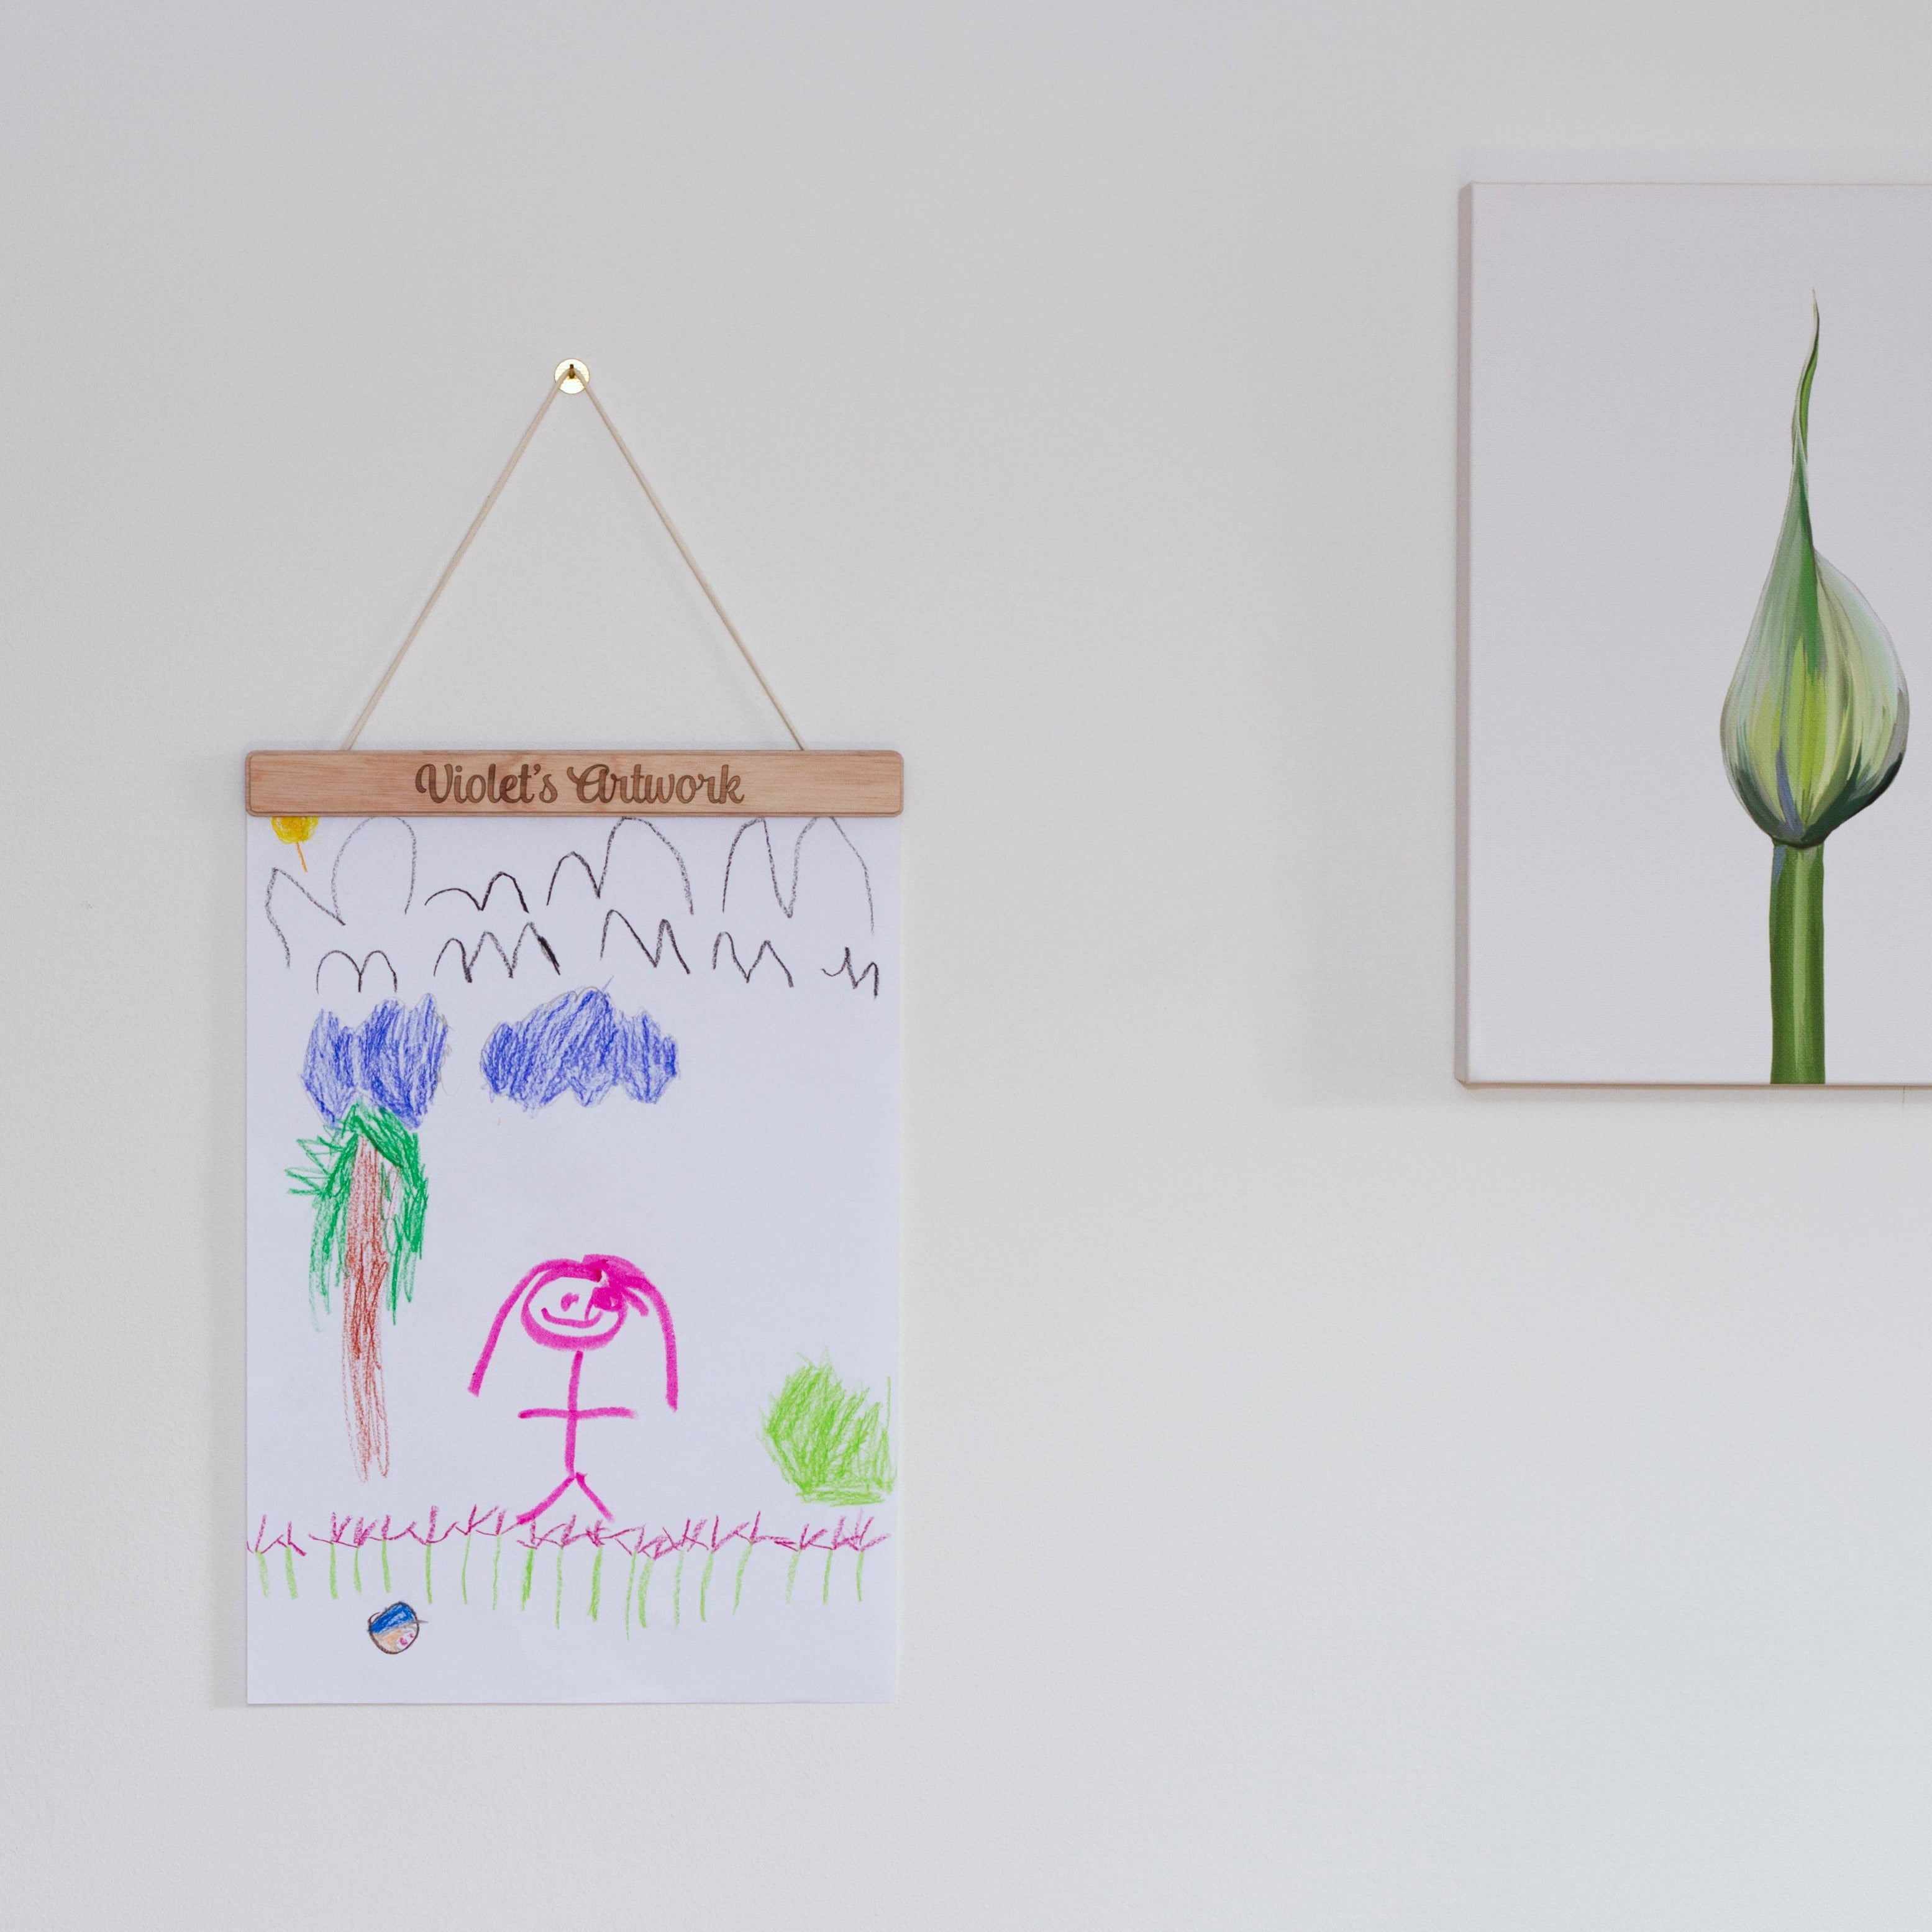 child's artwork hanging from a wooden hanger on a white wall